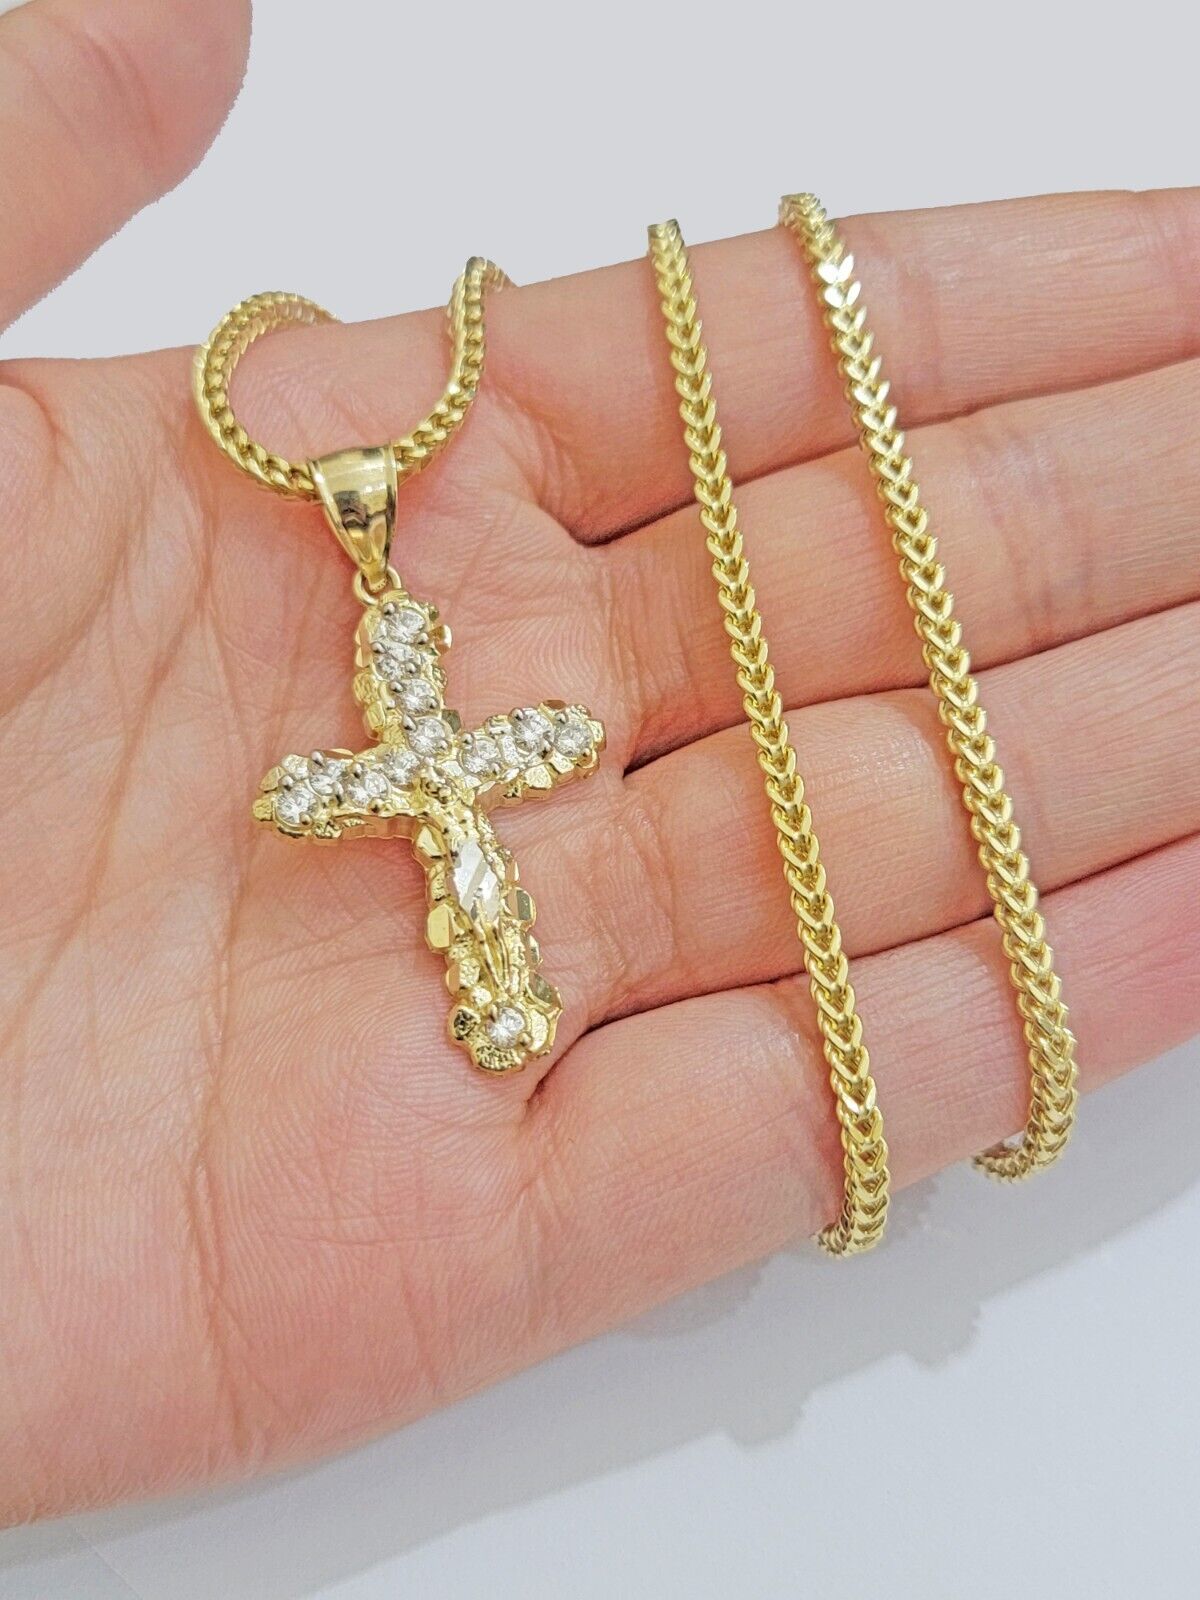 Real 10k Gold Cross Charm pendant & Franco Chain Necklace 2.5mm 18